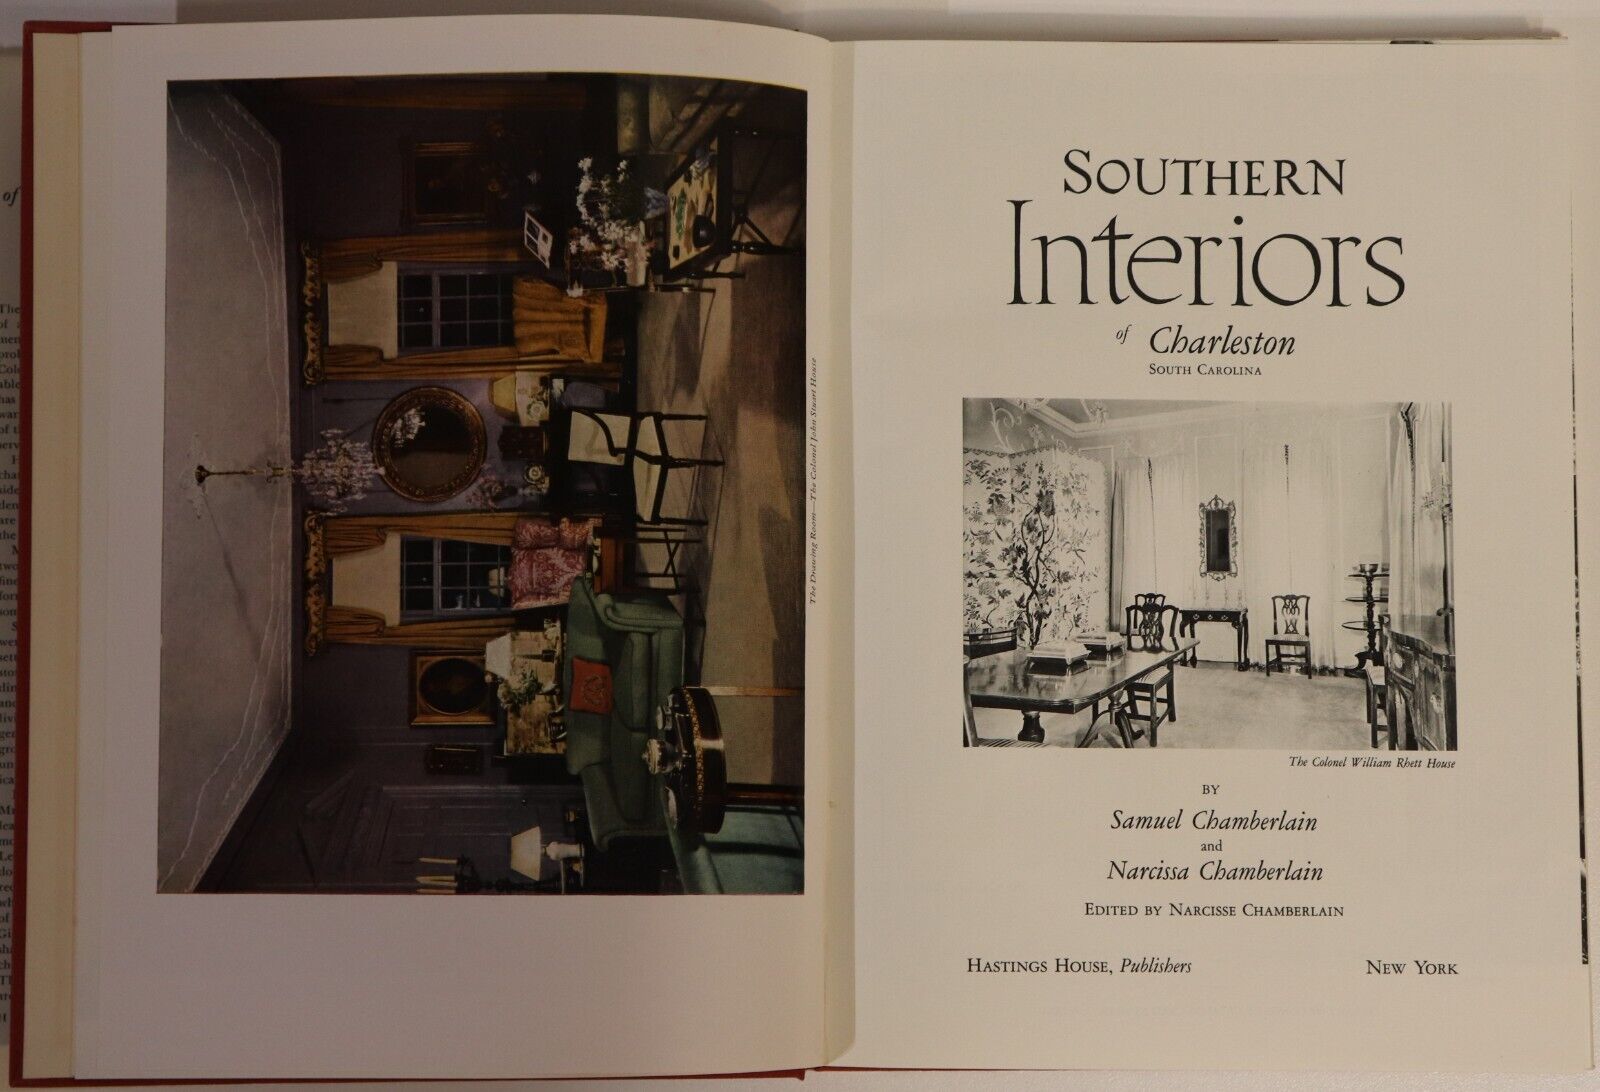 Southern Interiors Of Charleston - 1956 - Vintage American Architecture Book - 0